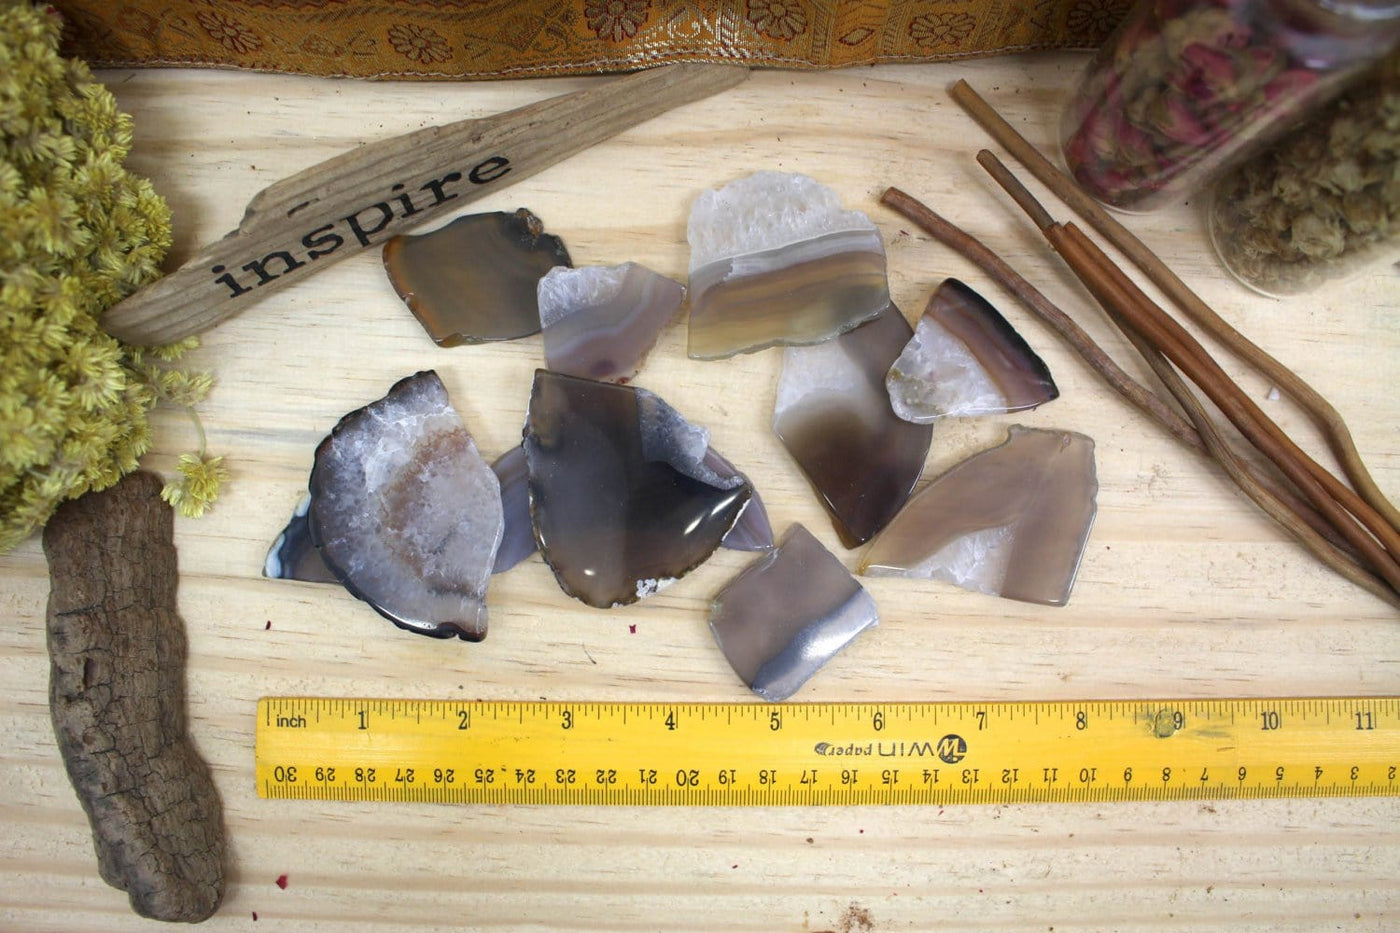 Tumbled Agate Slices of various sizes shown next to a ruler as a size comparison.